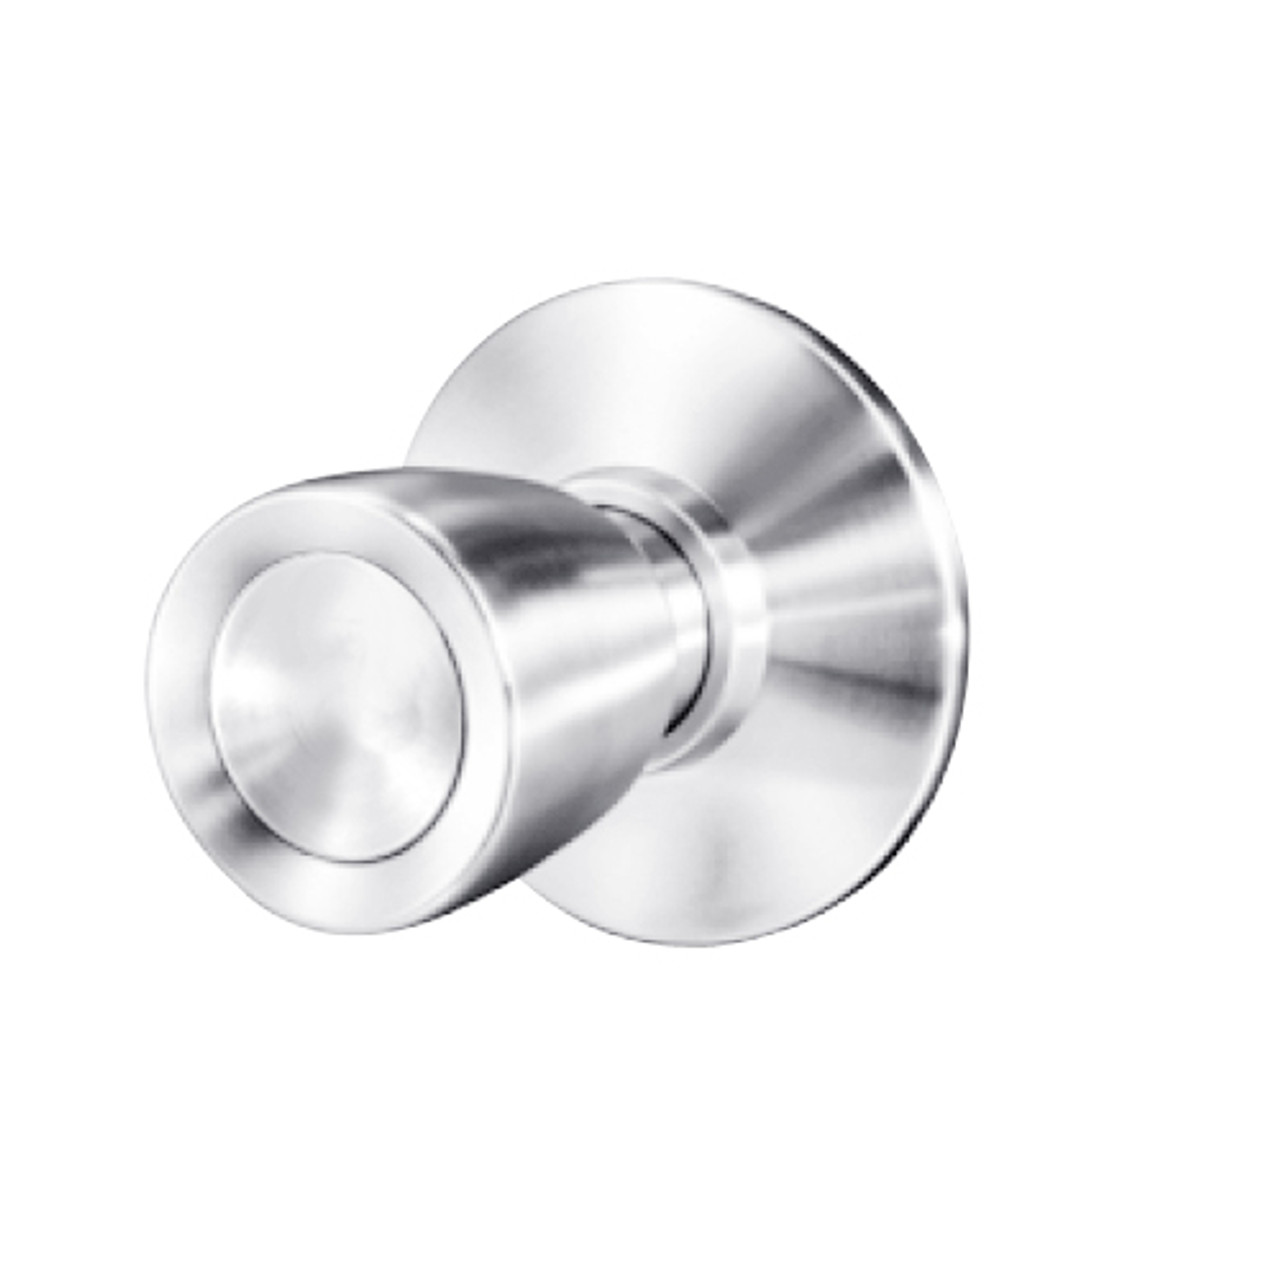 8K30Z6DS3625 Best 8K Series Closet Heavy Duty Cylindrical Knob Locks with Tulip Style in Bright Chrome